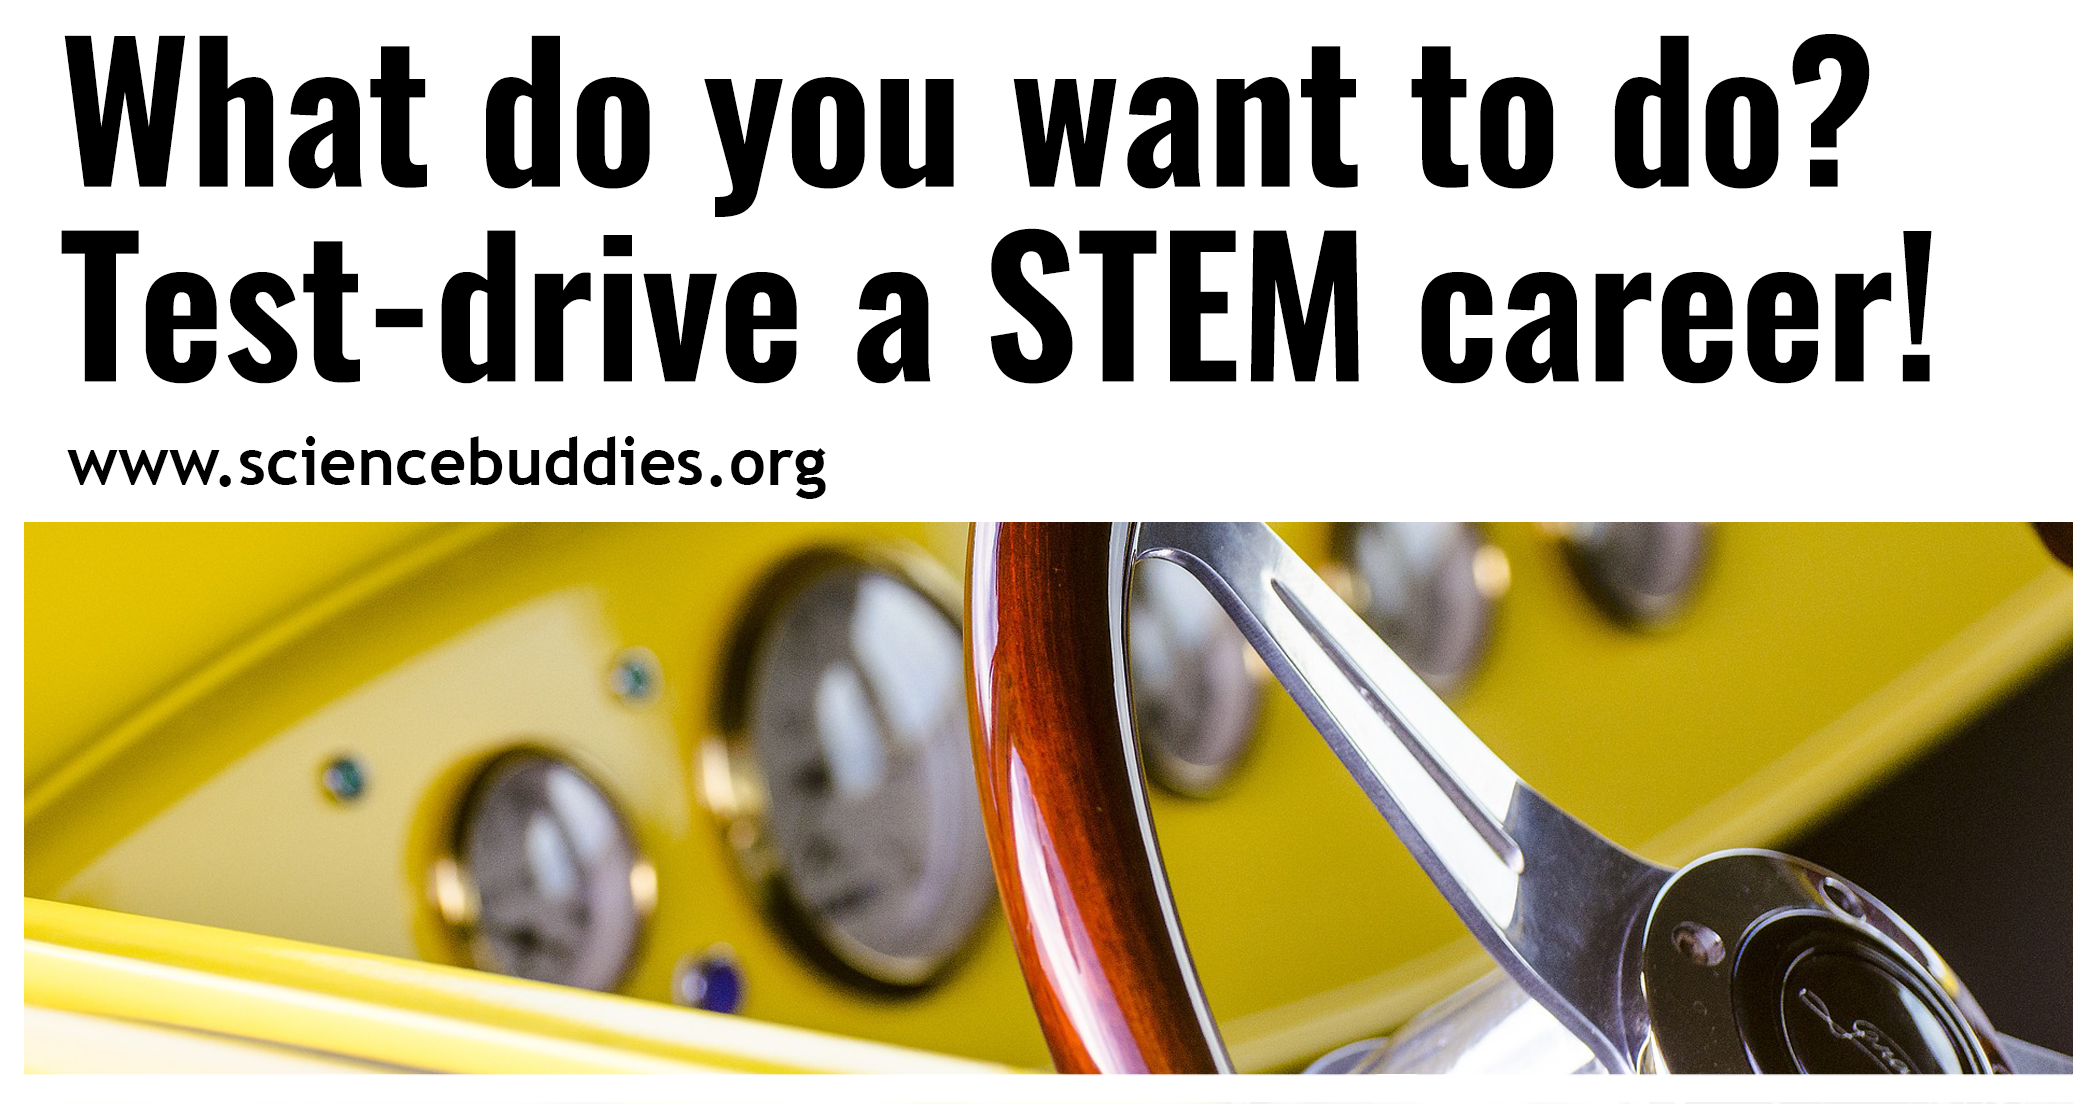 Close image of a steering wheel in a car to represent the concept of test-driving - Test-drive a STEM career with a hands-on activity